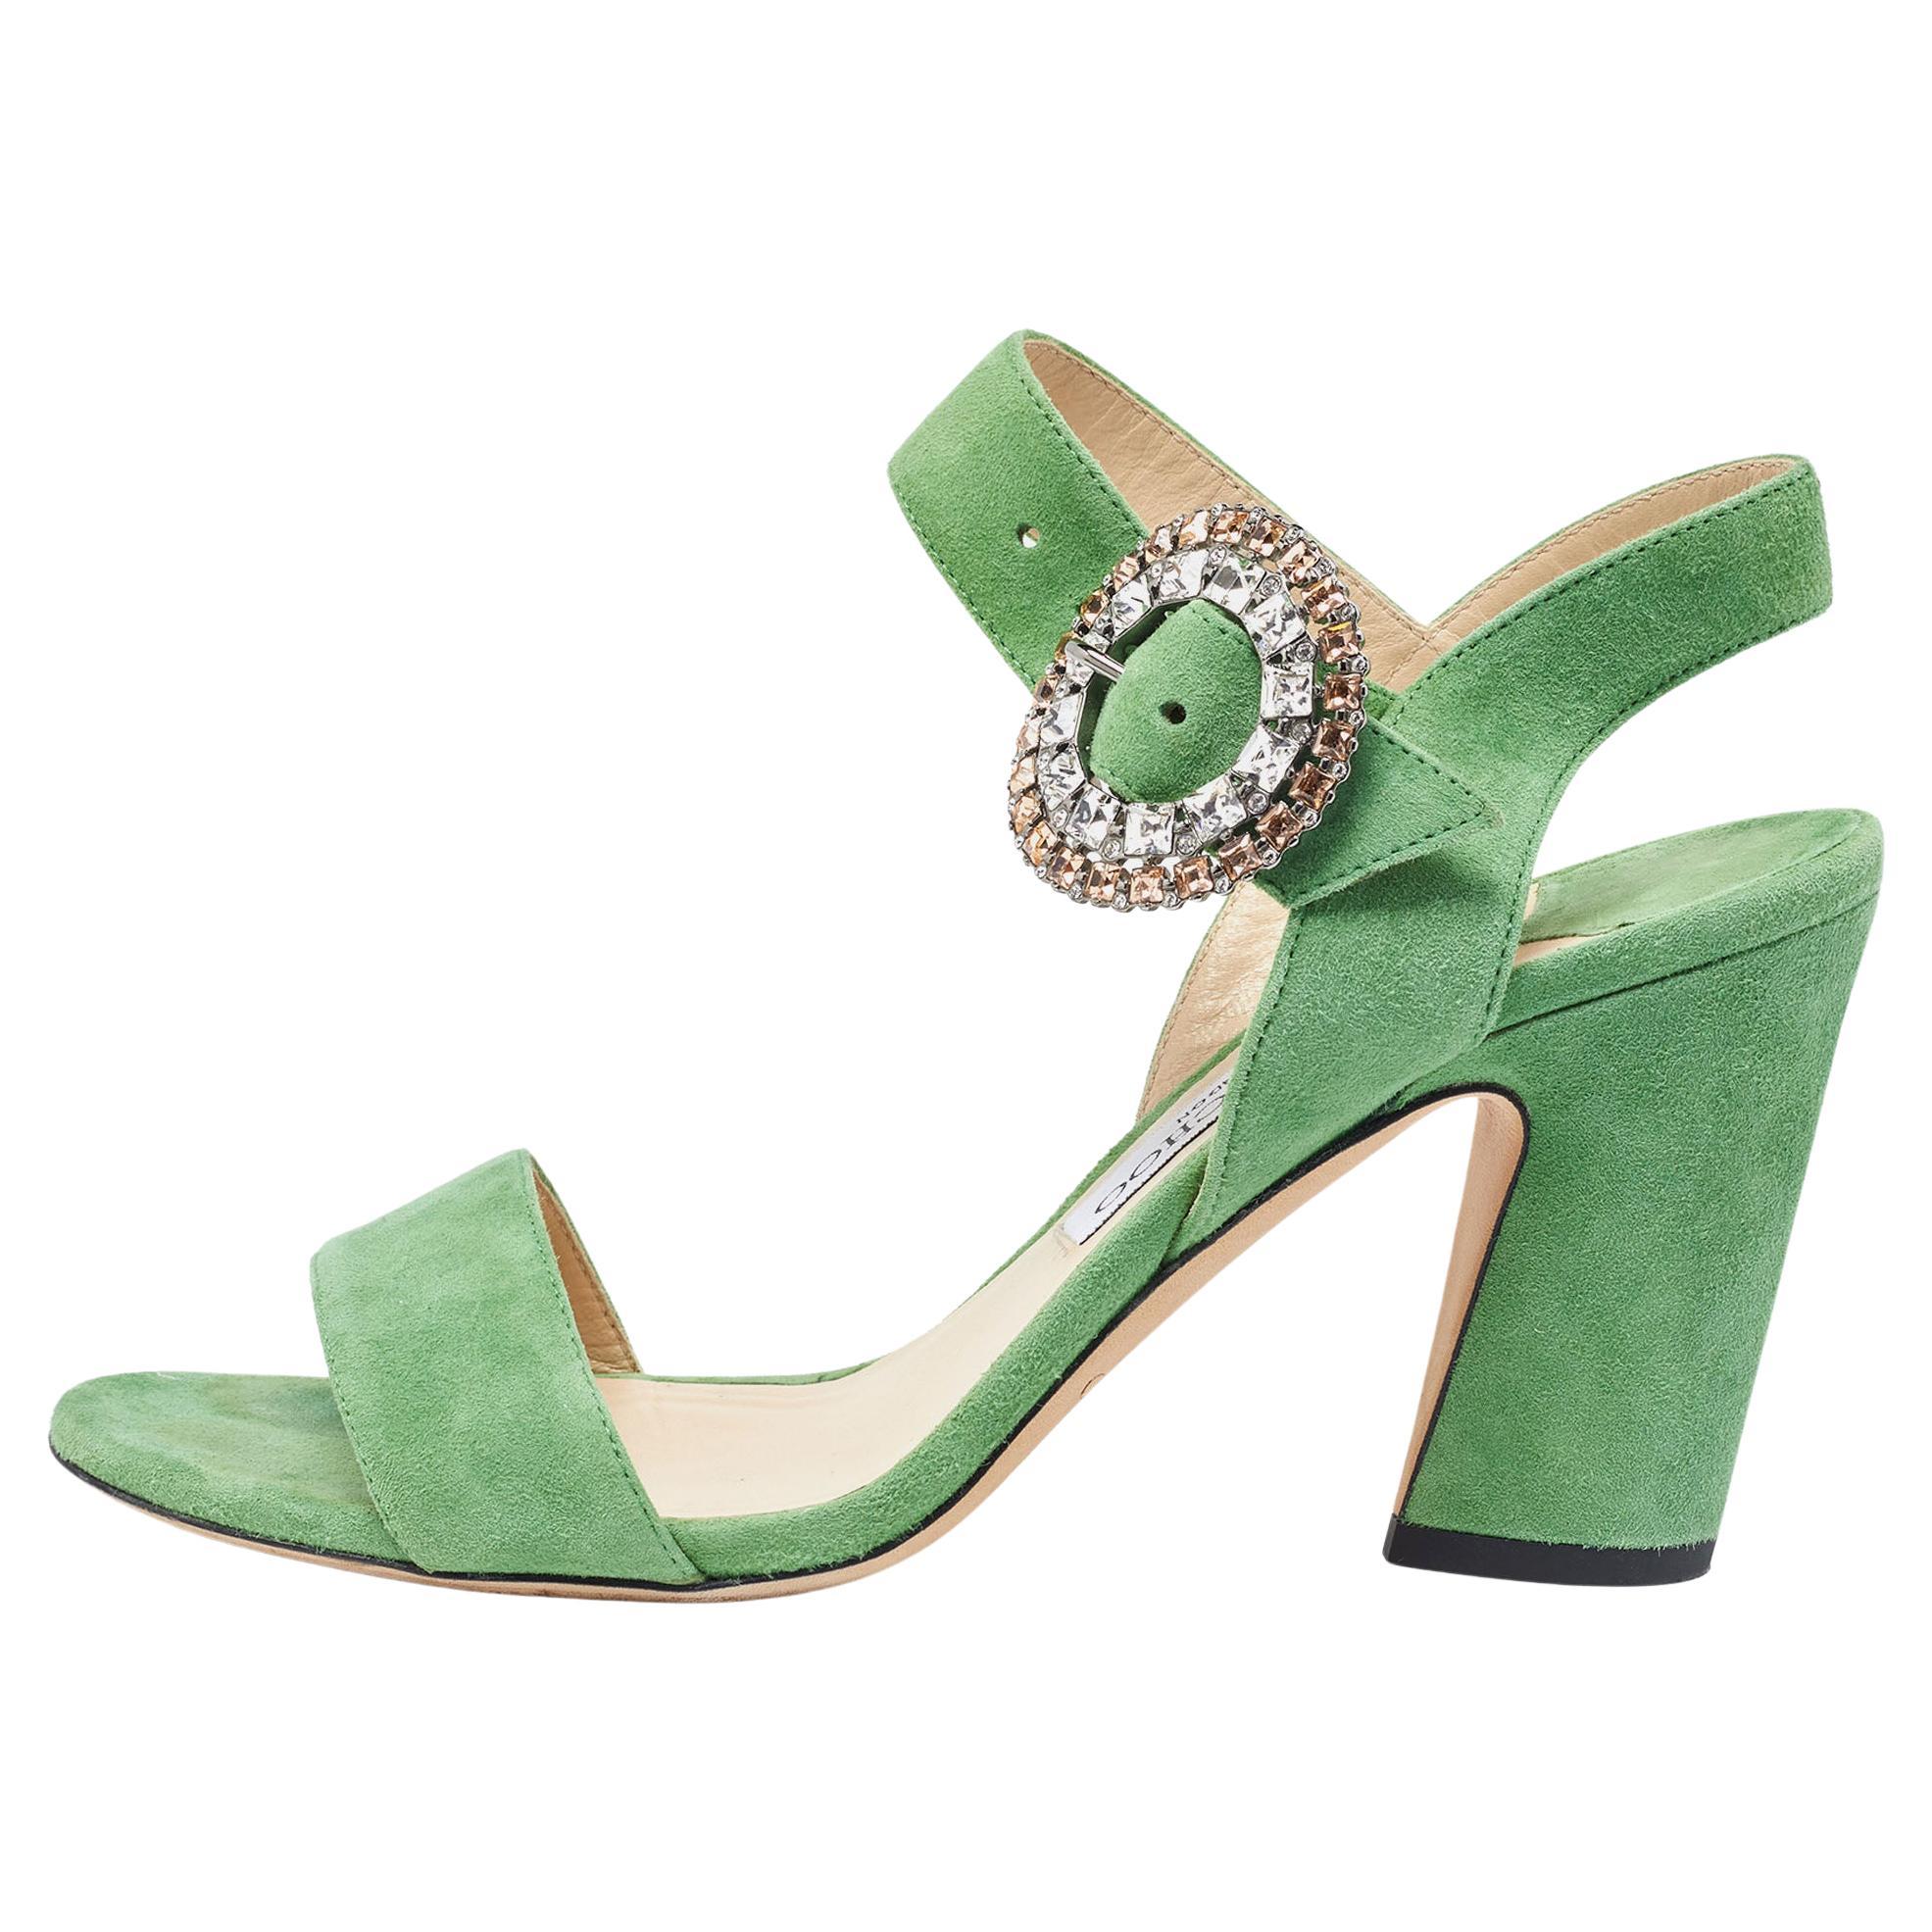 Jimmy Choo Green Suede Ankle Strap Sandals Size 38.5 For Sale